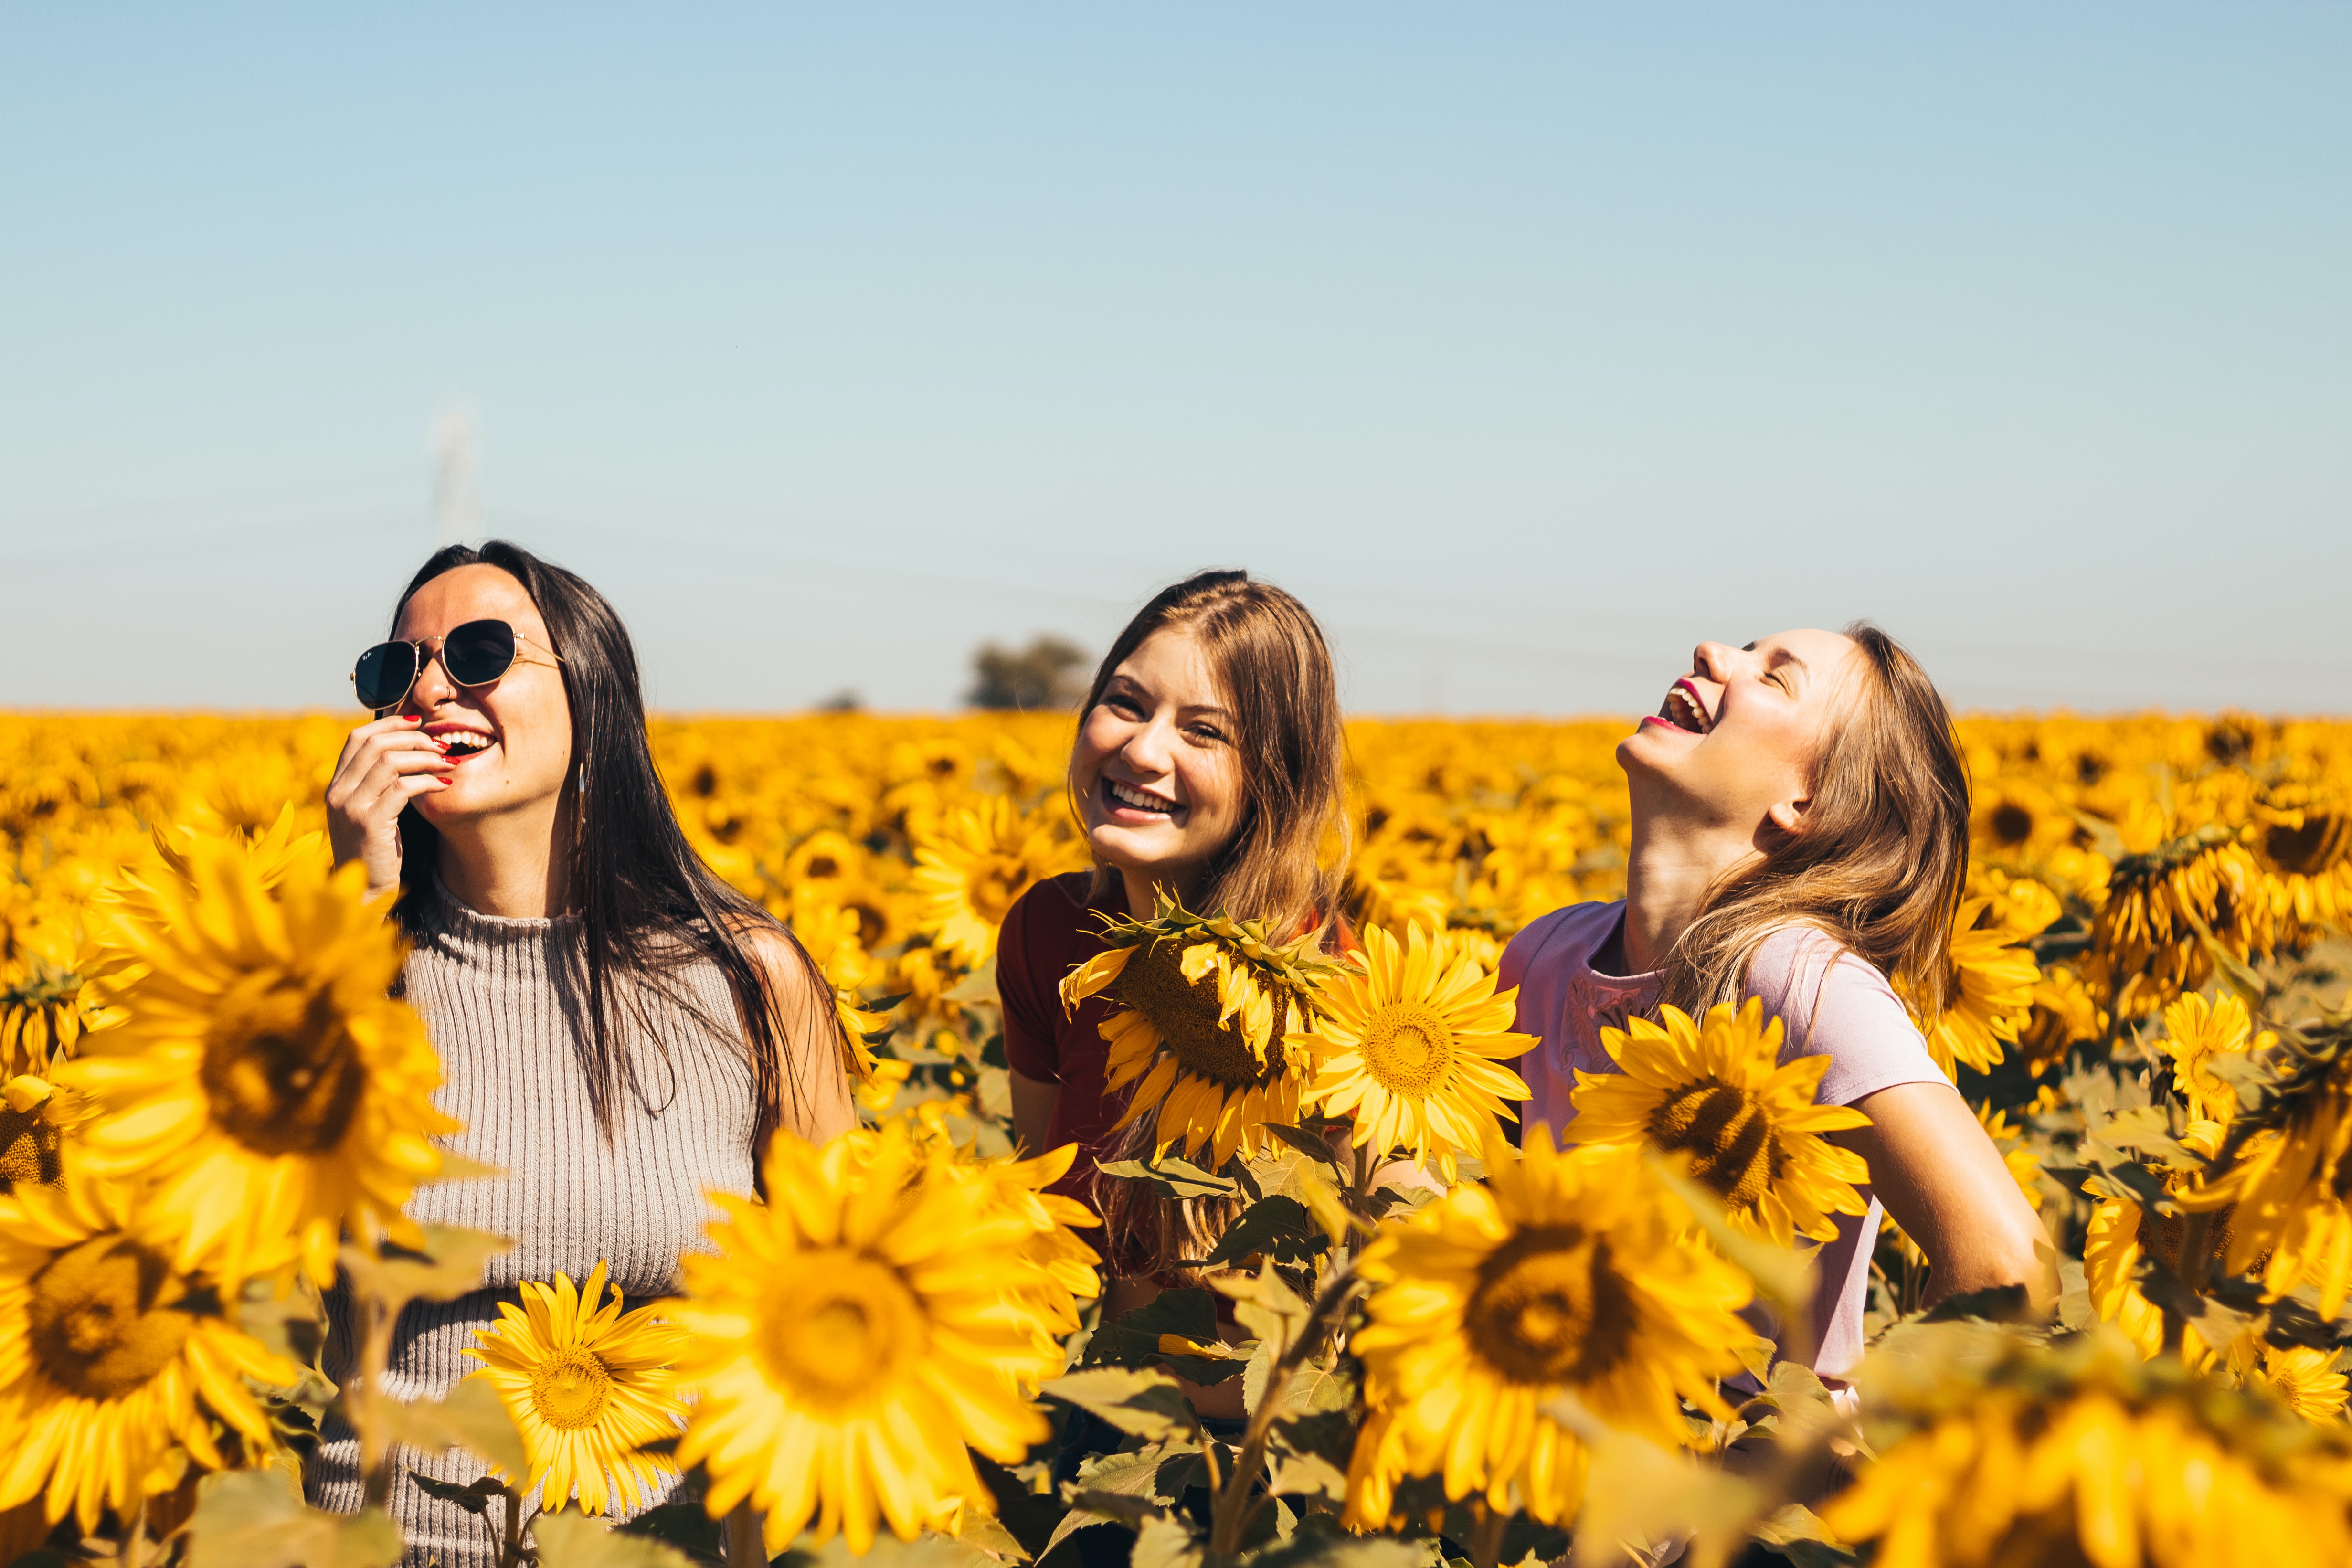 Three women laughing in a field of sunflowers. | Source: Unsplash